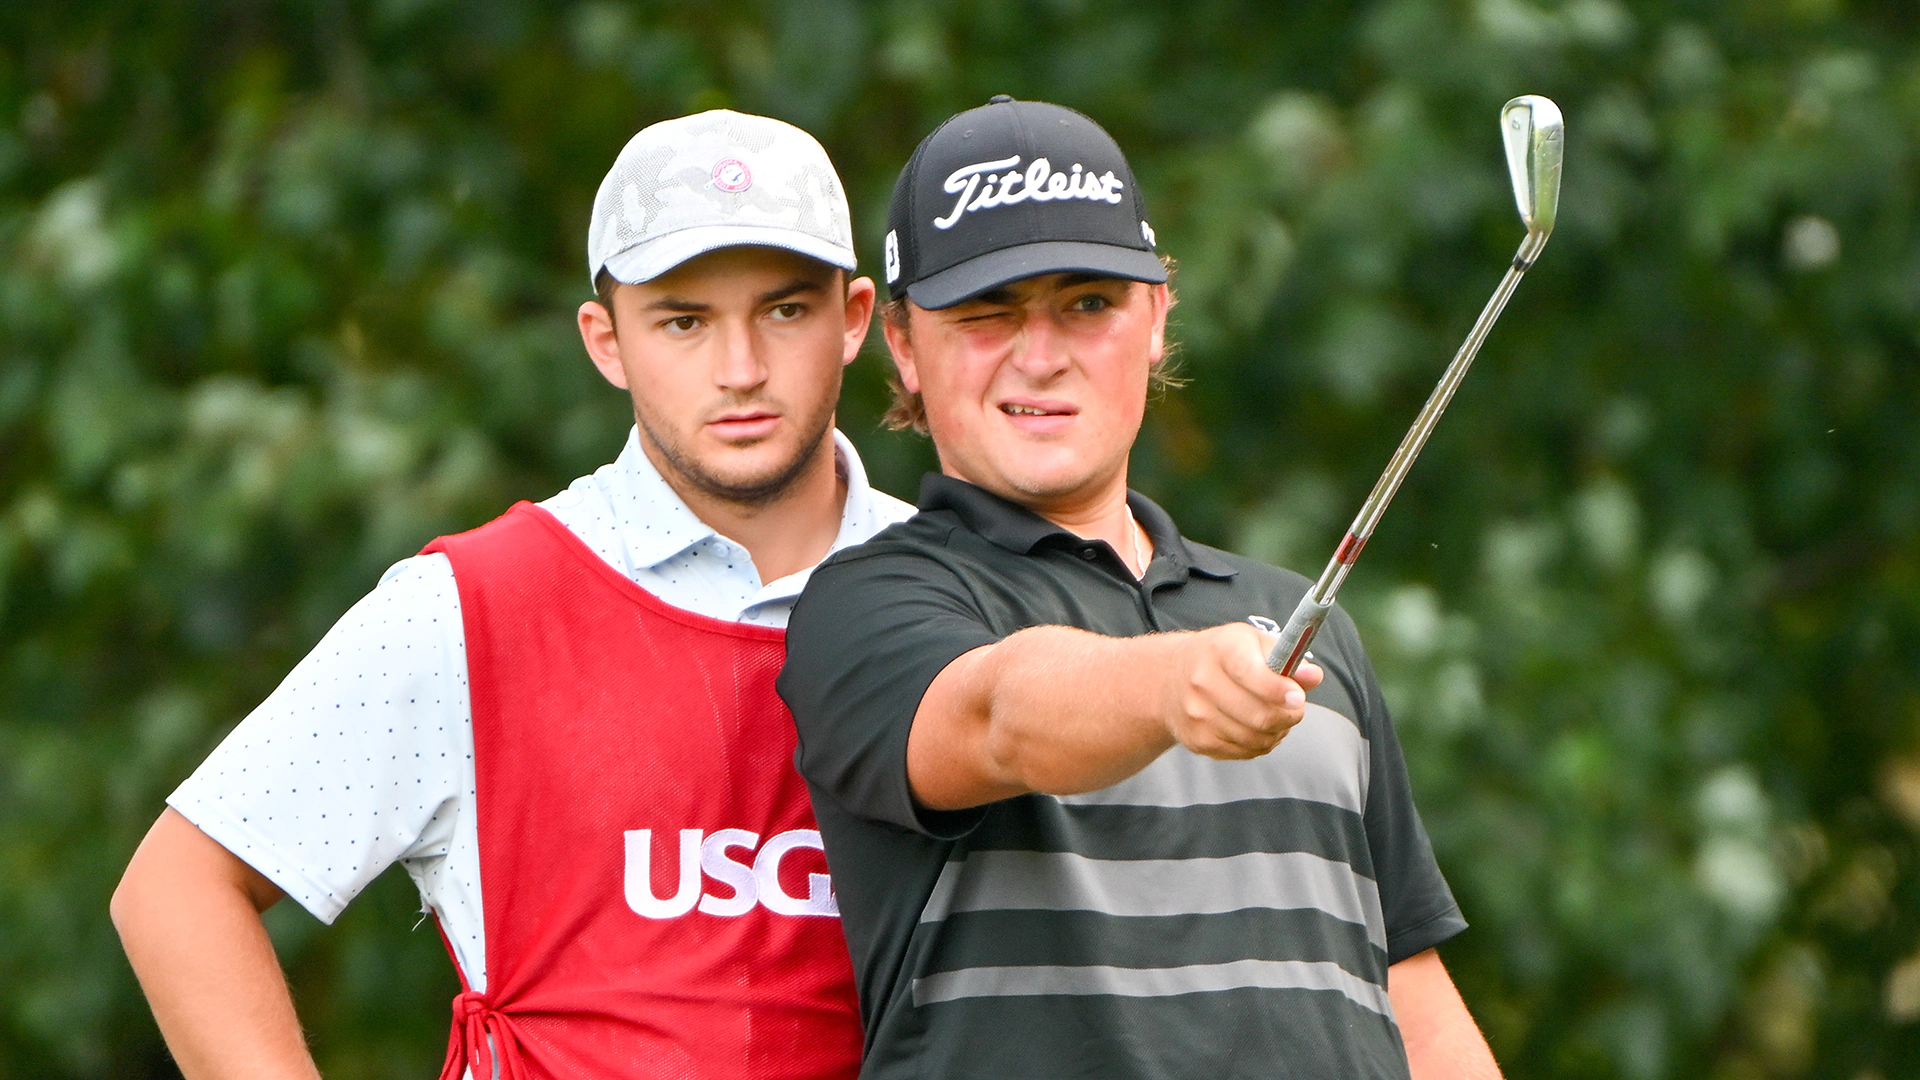 This 19-year-old son of a CURRENT PGA Tour player is tied for U.S. Amateur lead